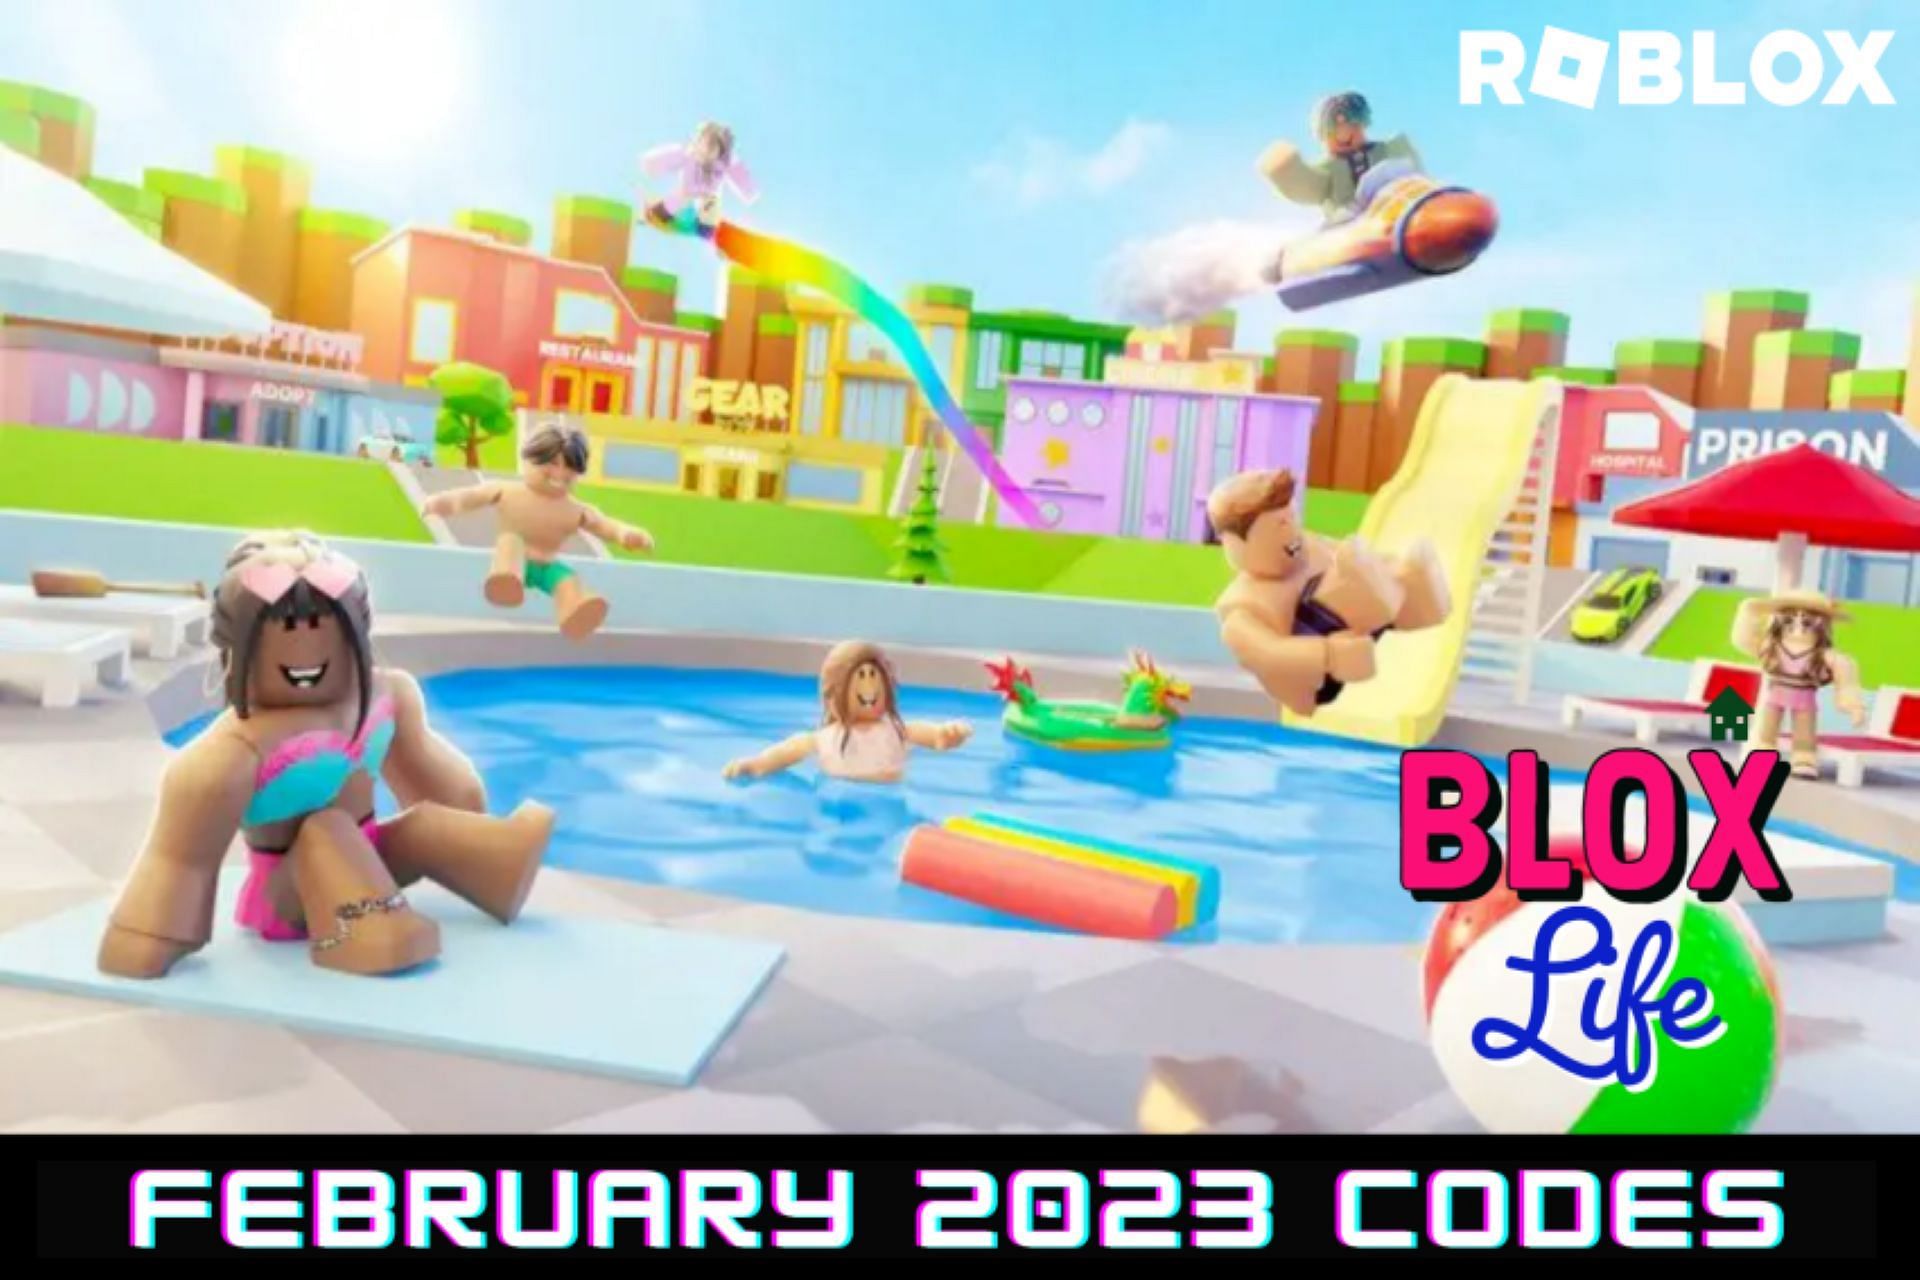 ALL NEW FEBRUARY ROBLOX PROMO CODES on ROBLOX 2022!